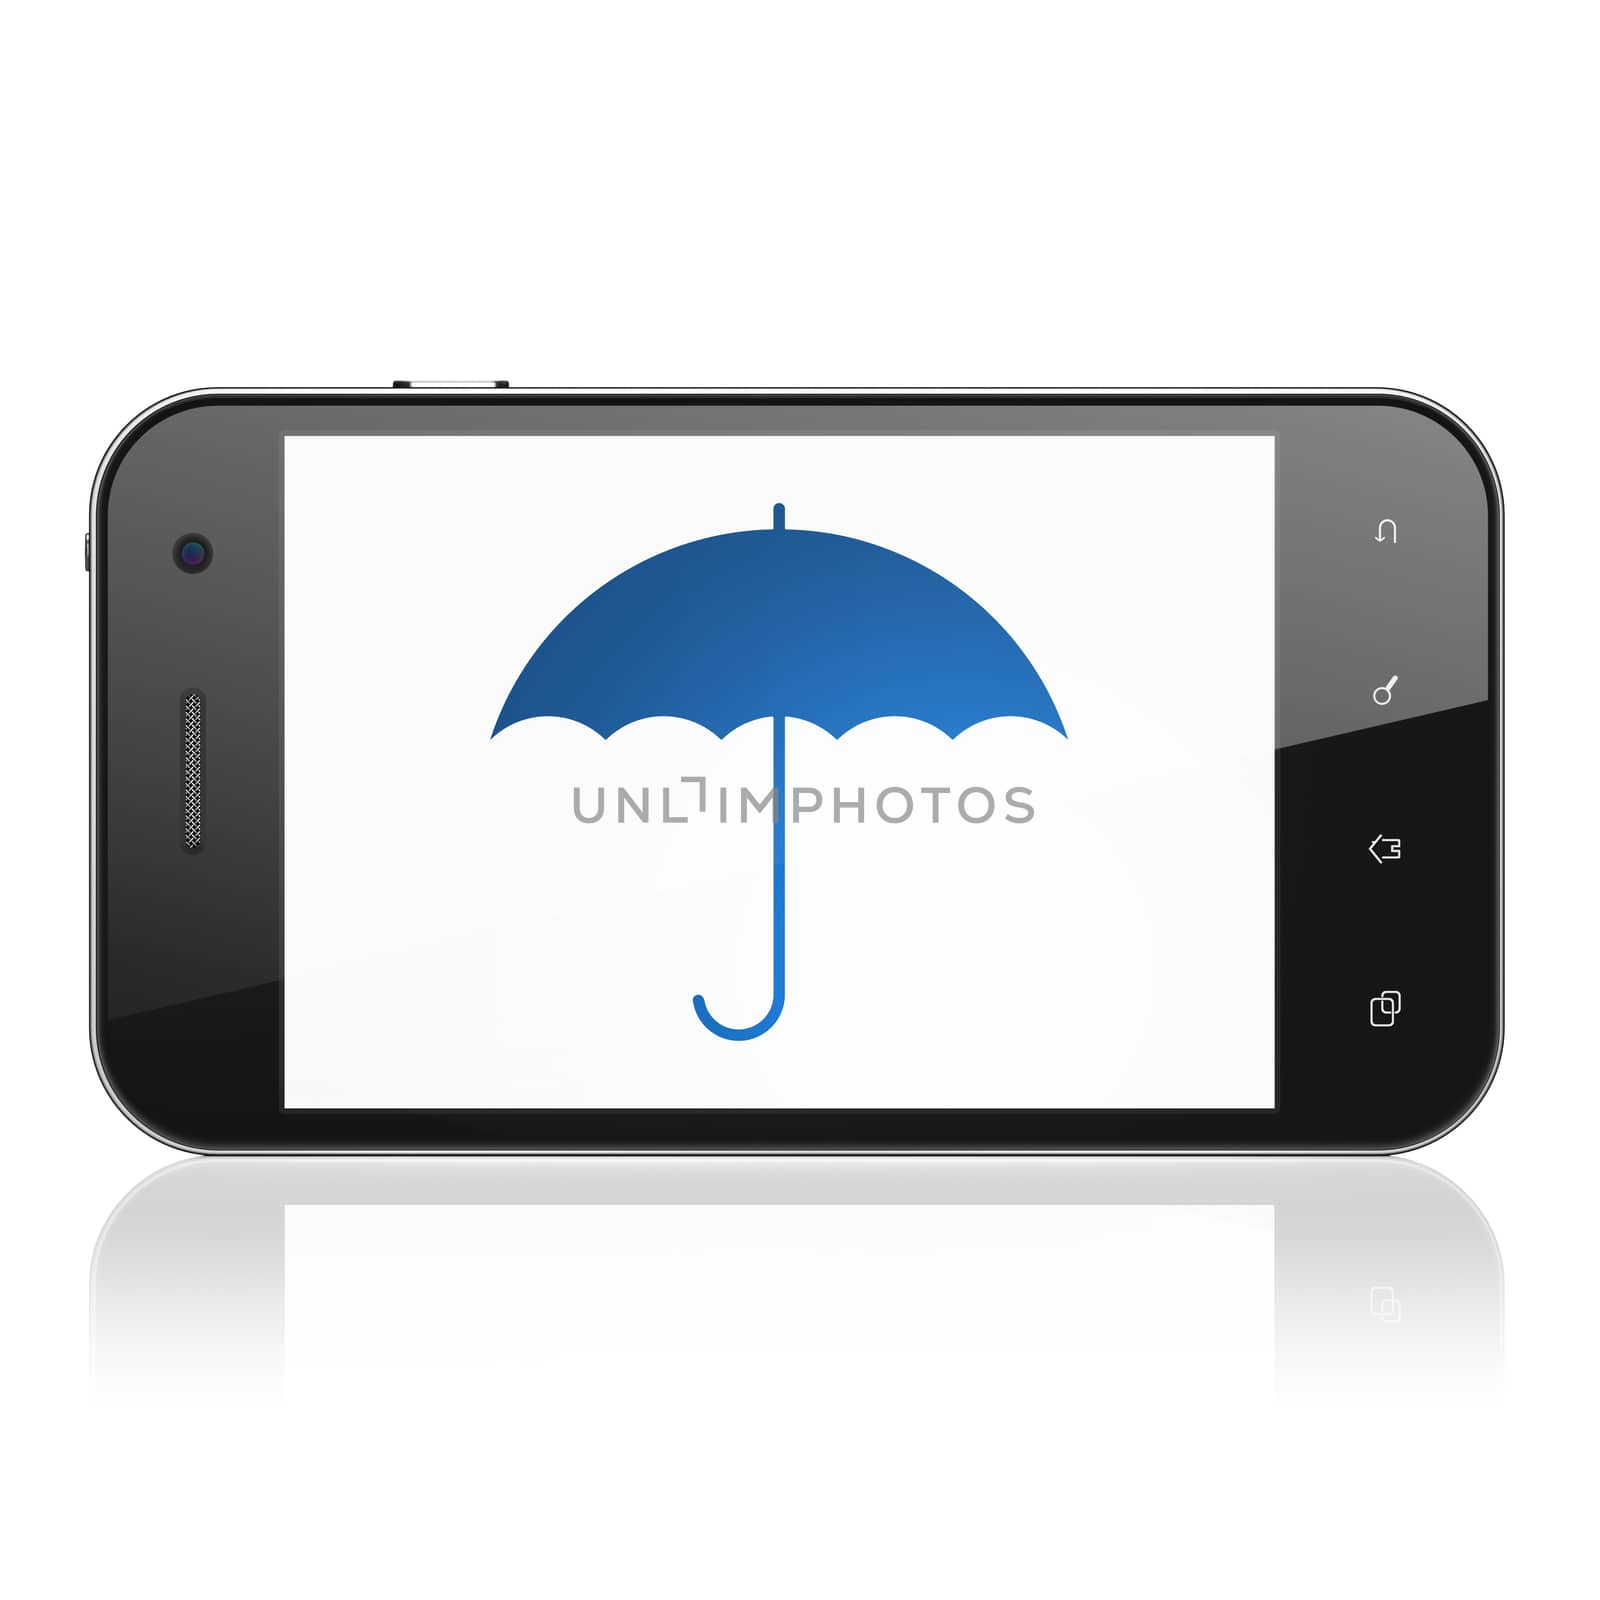 Protection concept: Umbrella on smartphone by maxkabakov